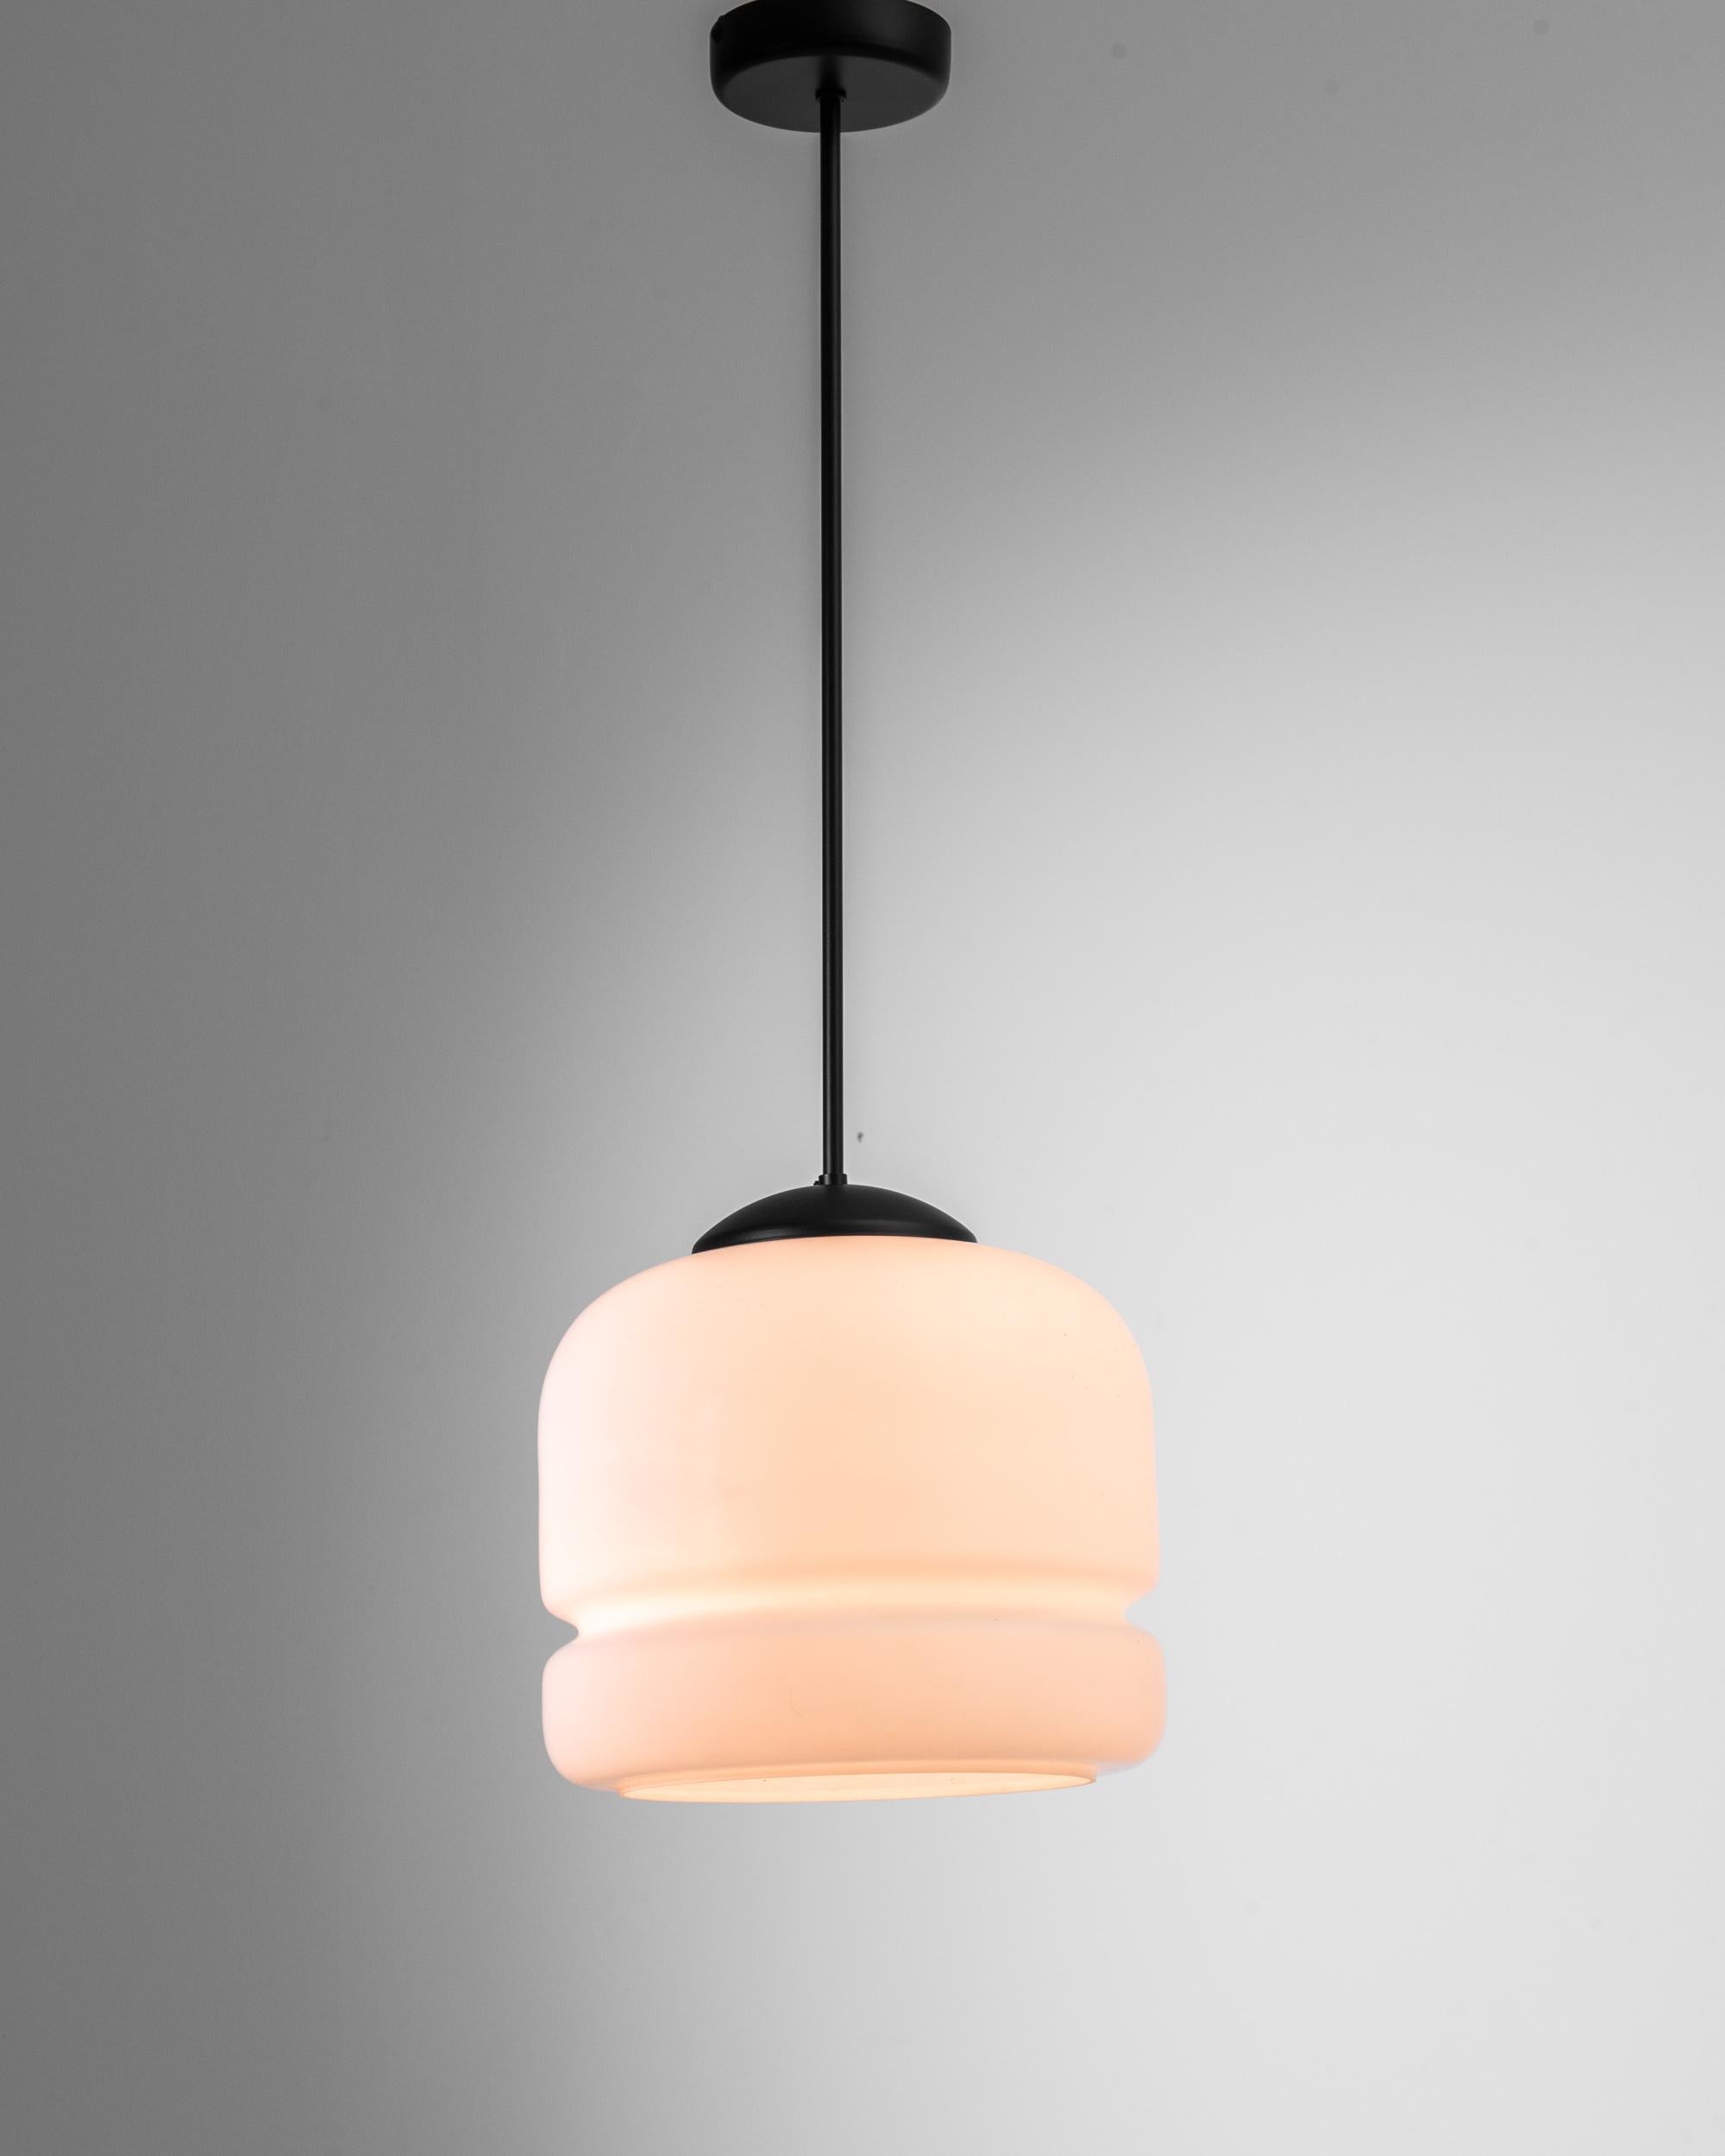 A glass and metal pendant lamp from Czechia, produced during the 20th Century. Descending from the ceiling upon a three foot rod, this charming lamp, with its bulbous, organically curved body of opal glass, feels constantly contemporary. Like two